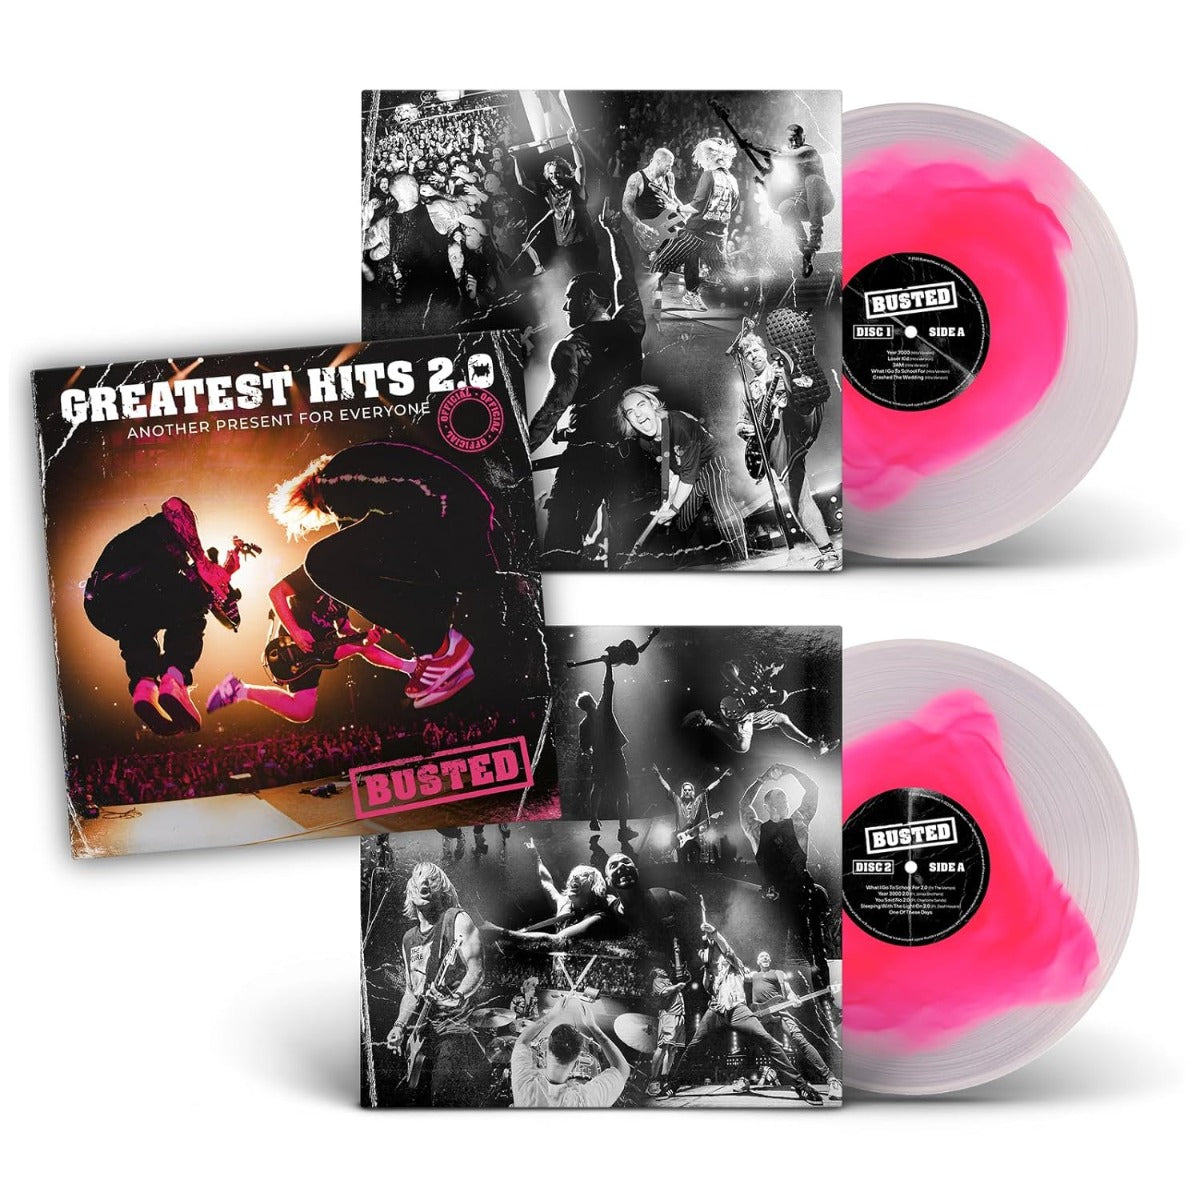 Busted | Greatest Hits 2.0 (Another Present For Everyone) (Pink & Clear Vinyl) [Import] (2 Lp's) | Vinyl - 0